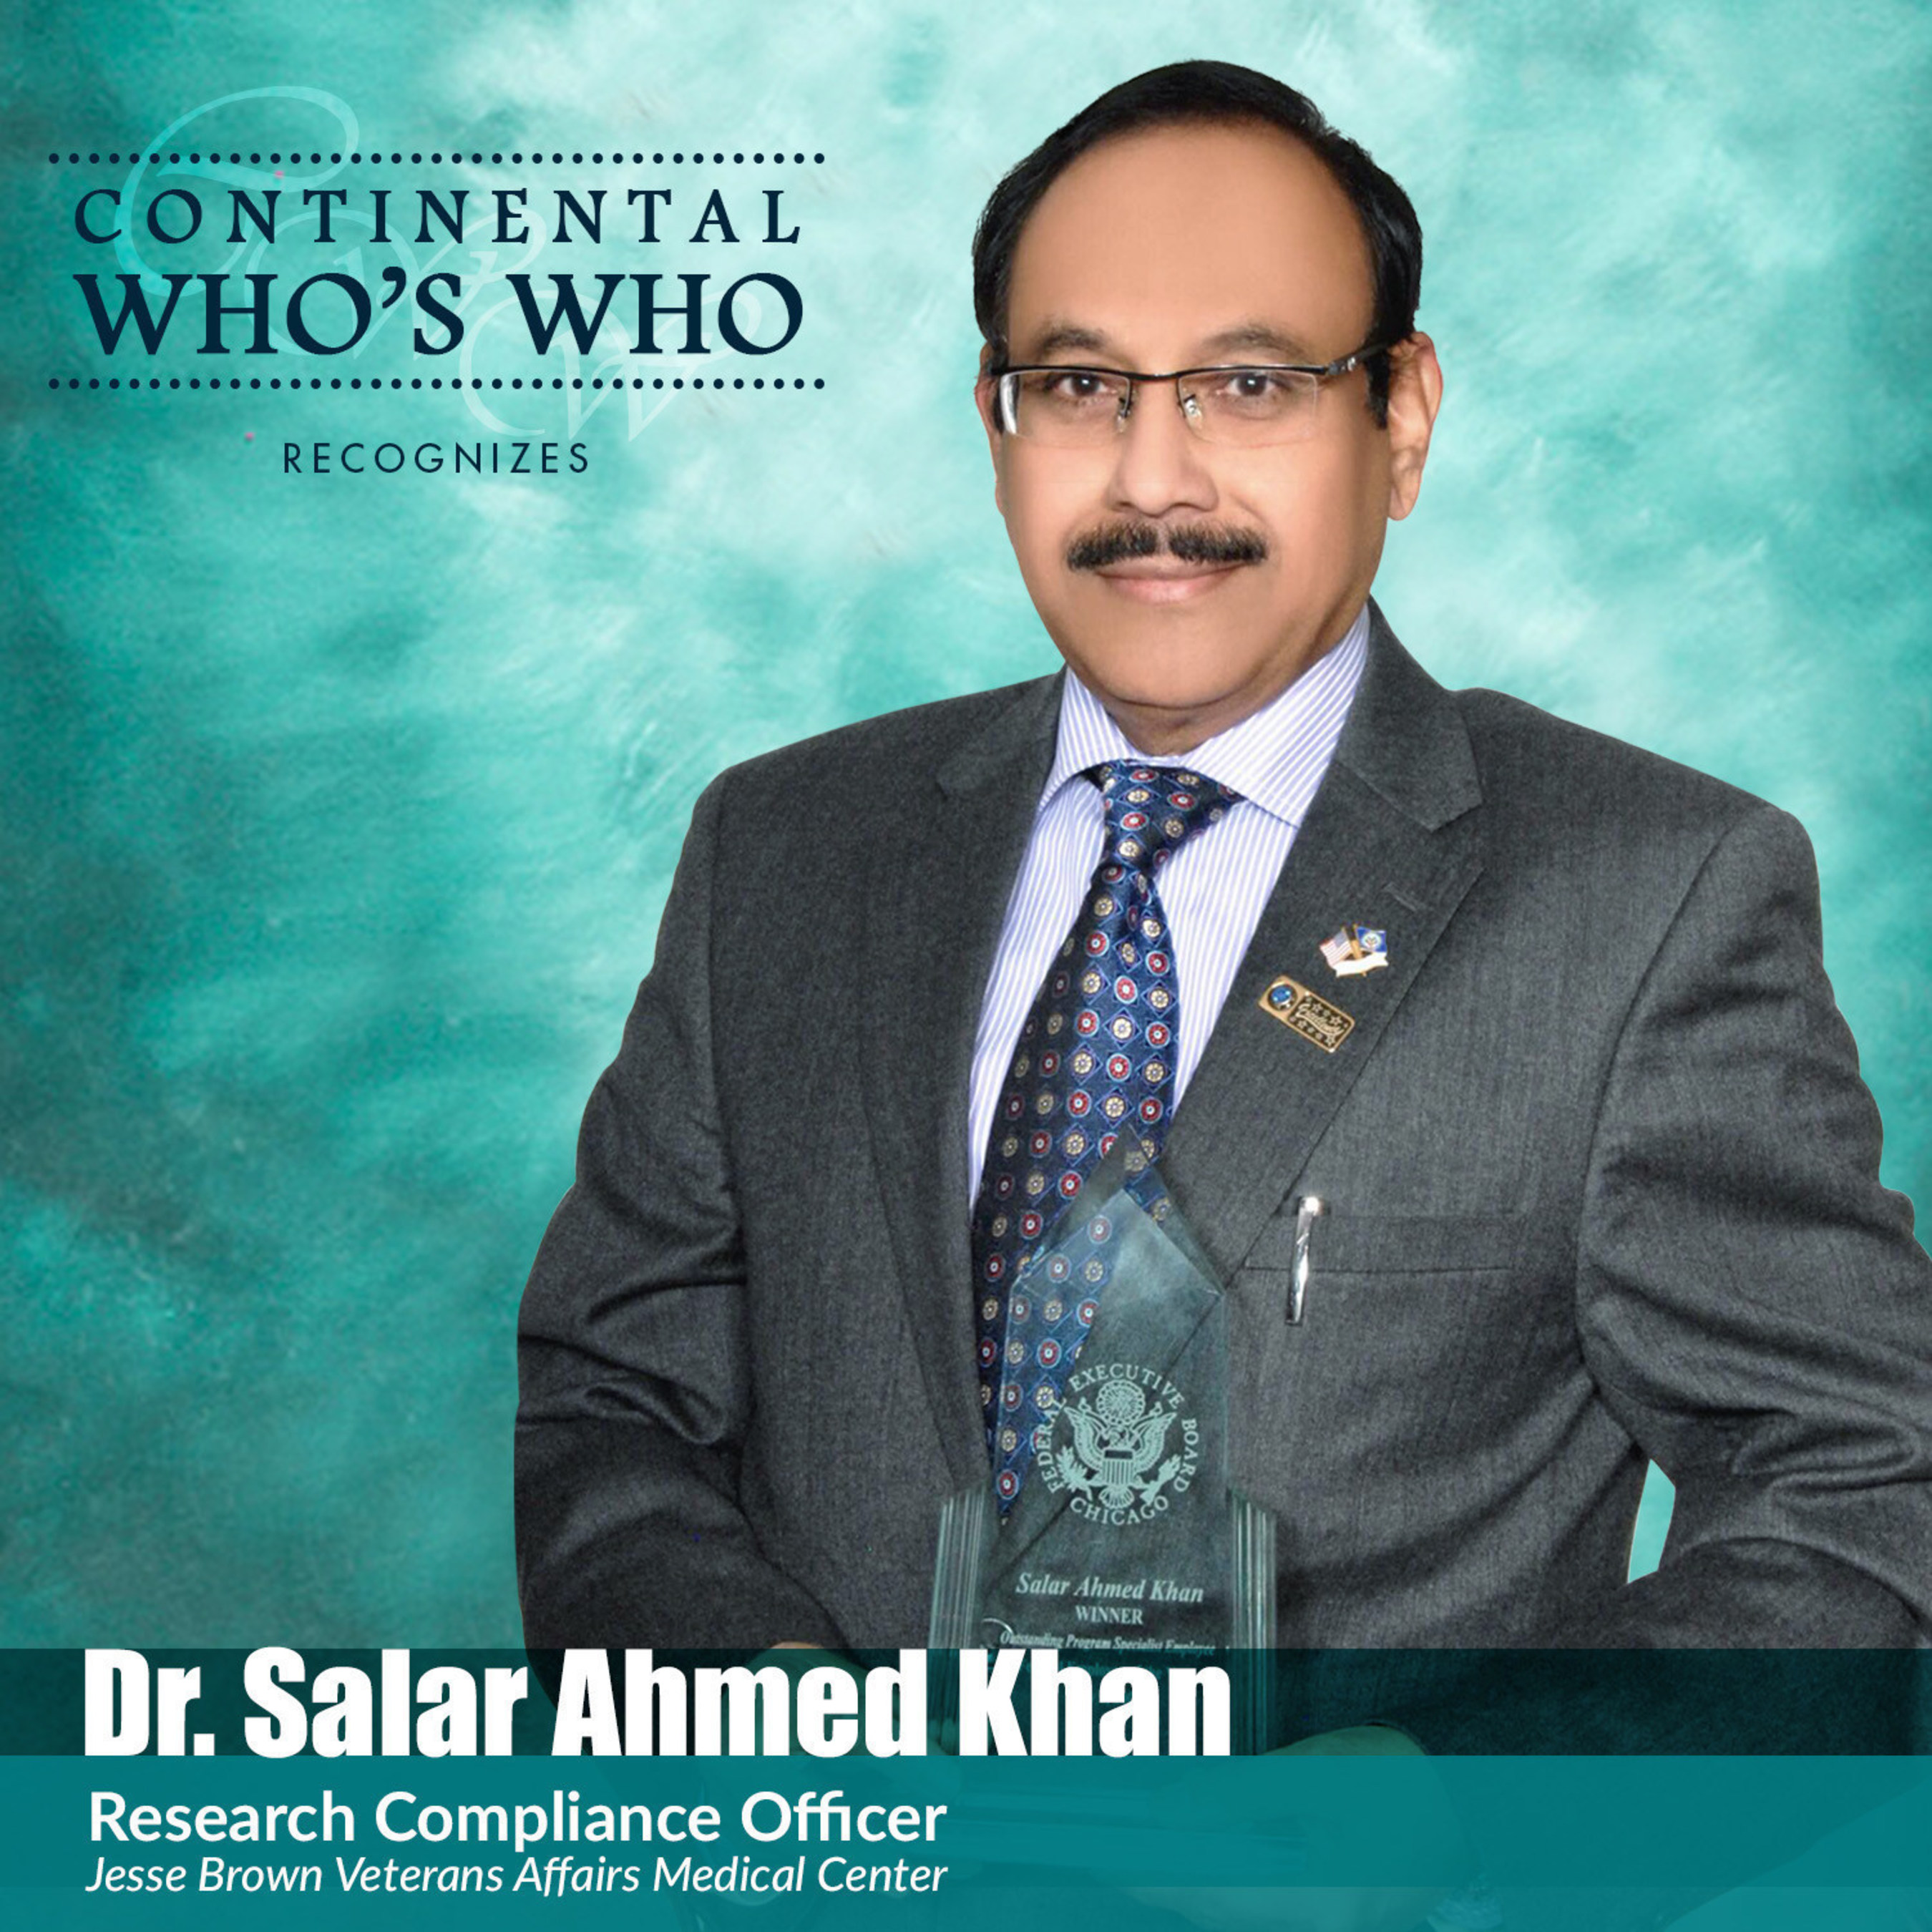 Salar Ahmed Khan, MD, MBA is recognized by Continental Who's Who